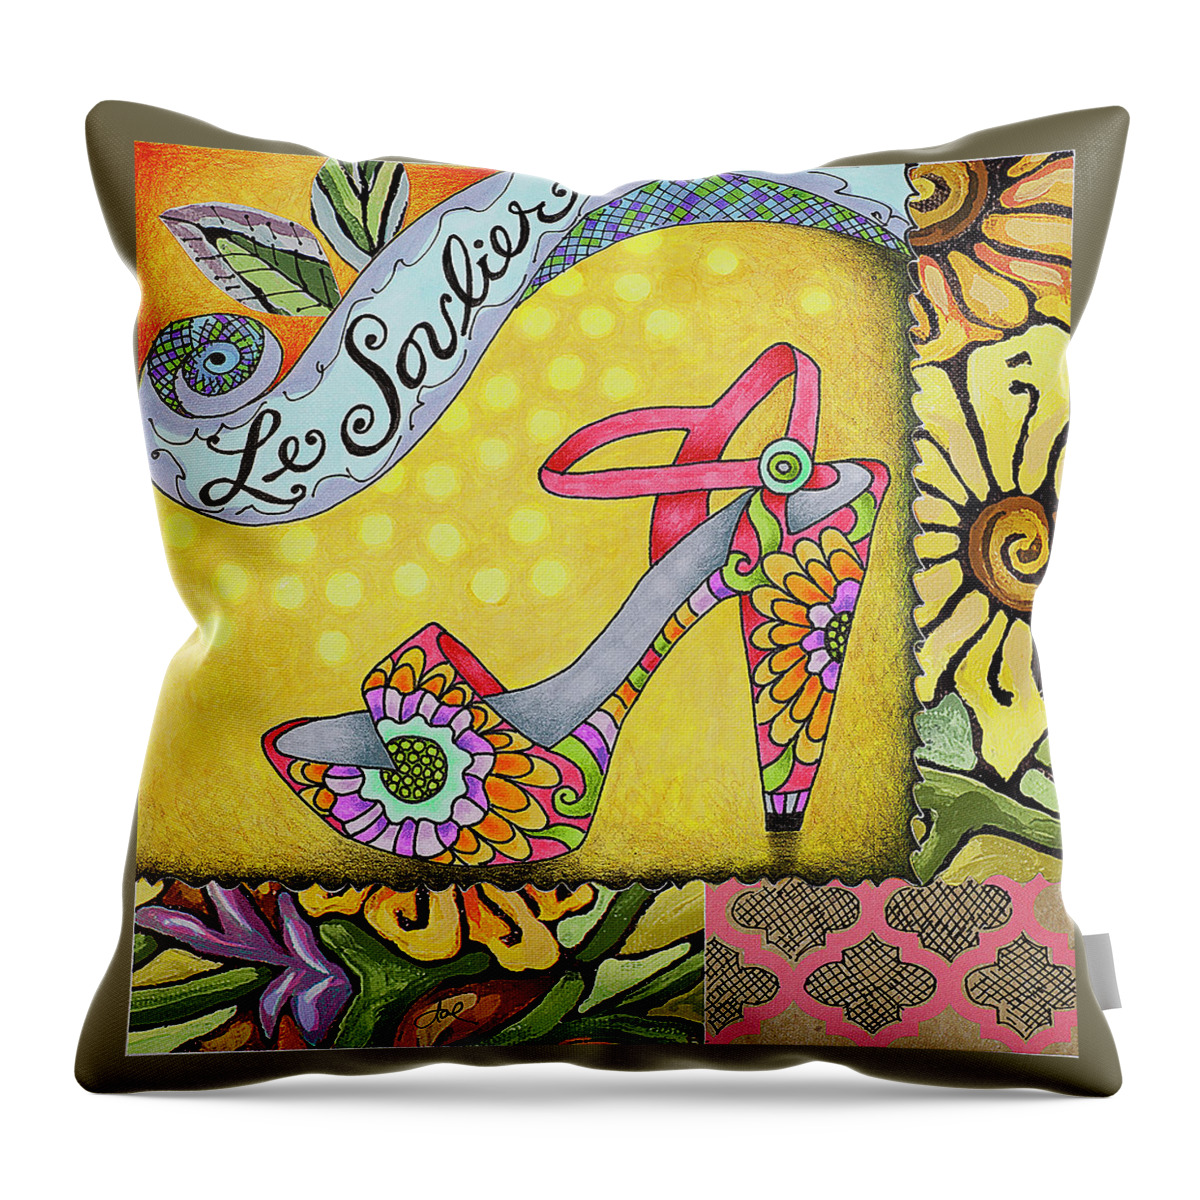  Throw Pillow featuring the drawing Stepping Out by Janice A Larson